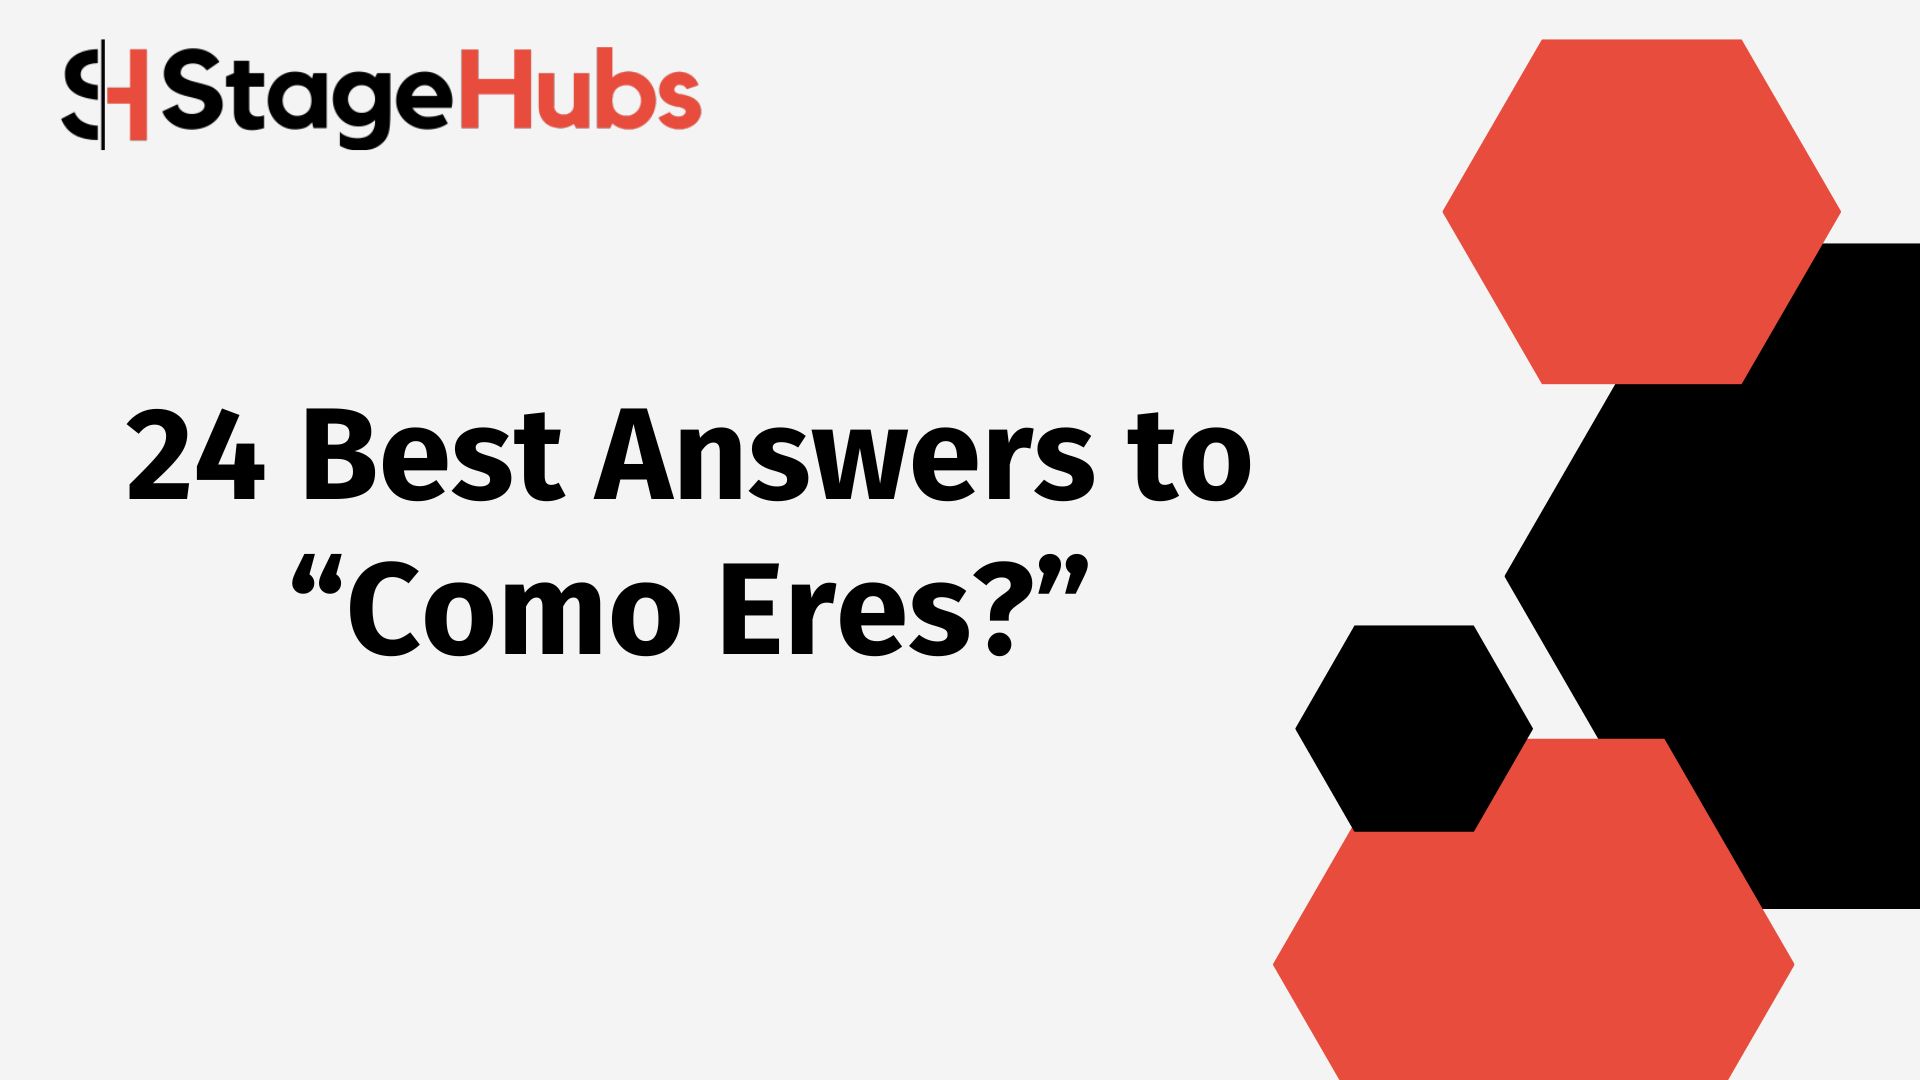 24 Best Answers to “Como Eres?”